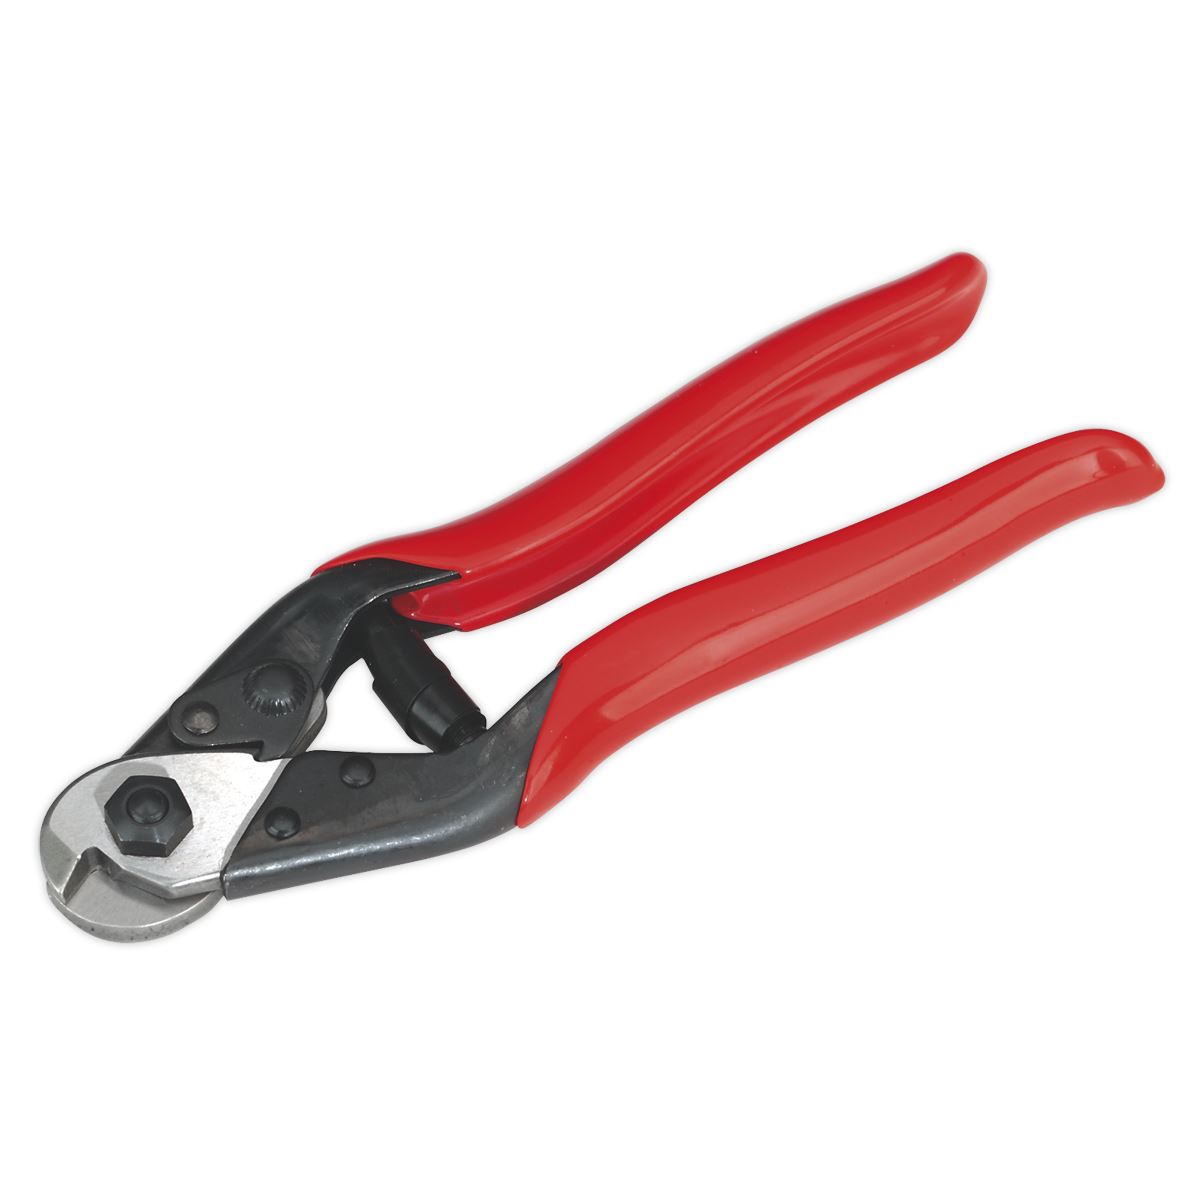 Sealey Premier Wire Rope/Spring Cutter 190mm